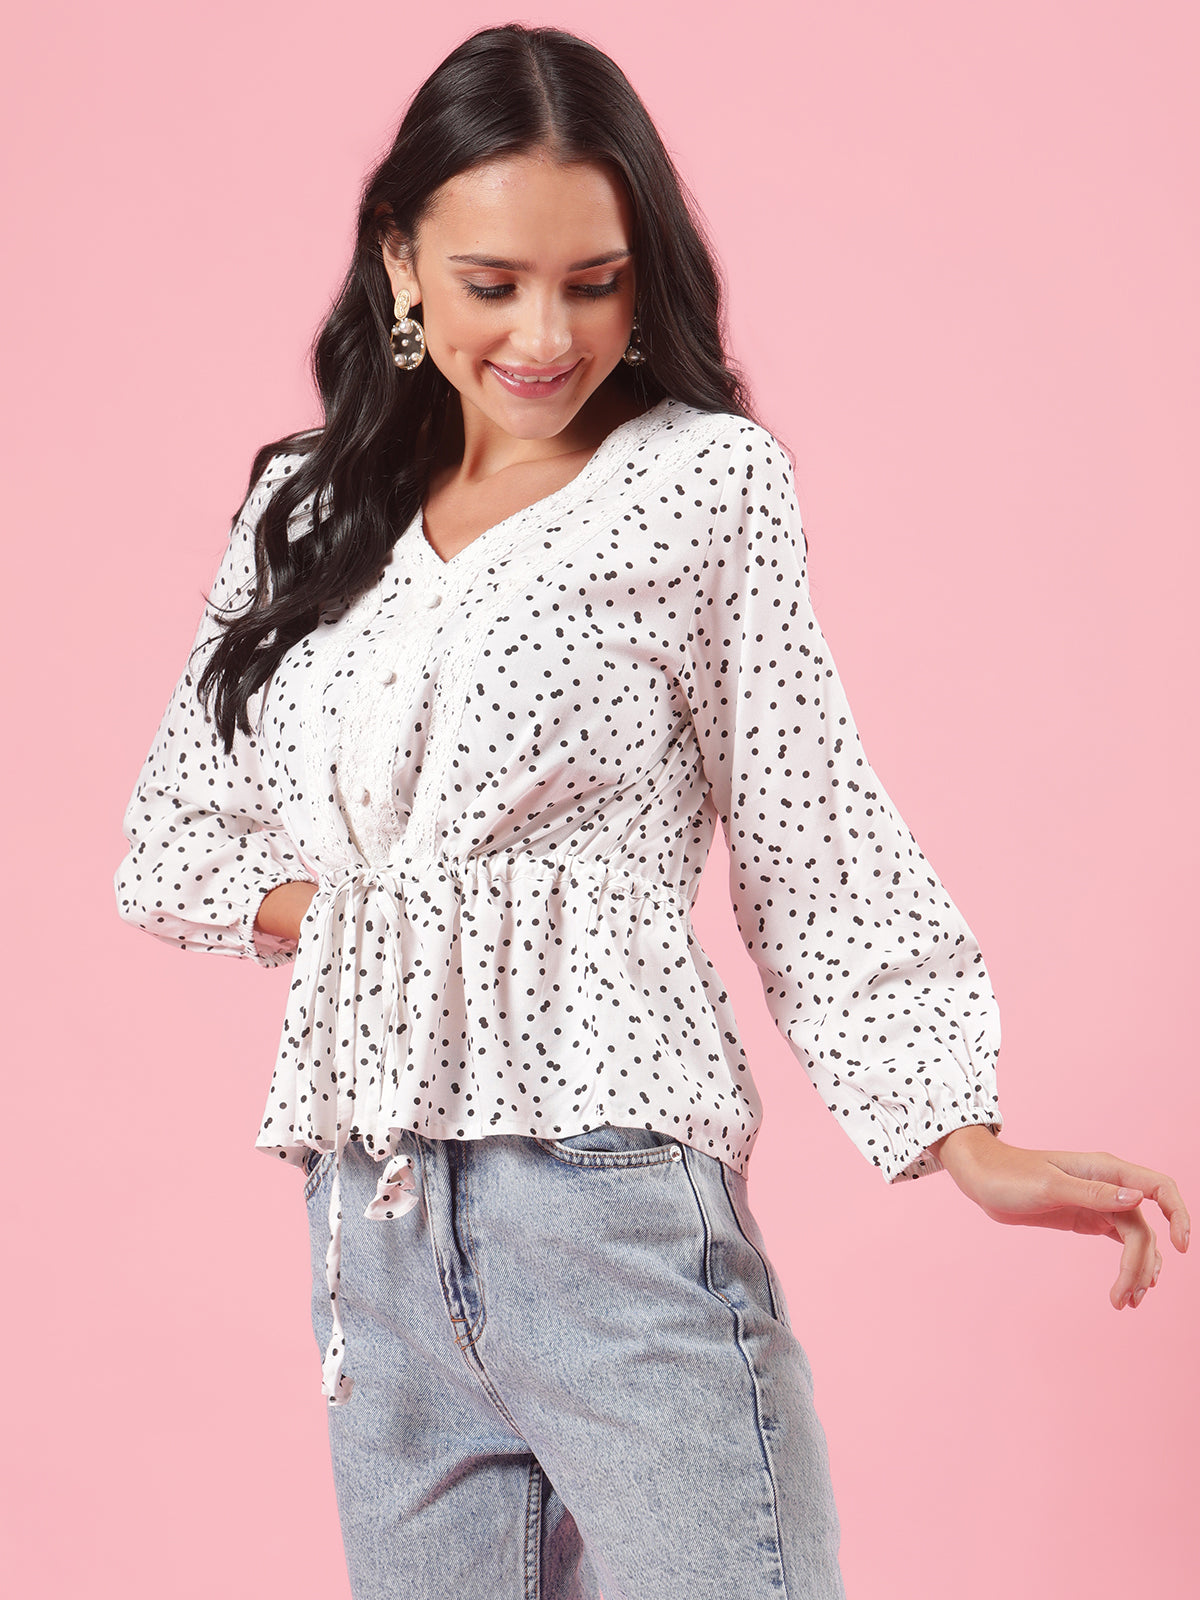 Mono Chrome White and Black Polka Dot Womens Casual Top with Lace and Drawstring Details